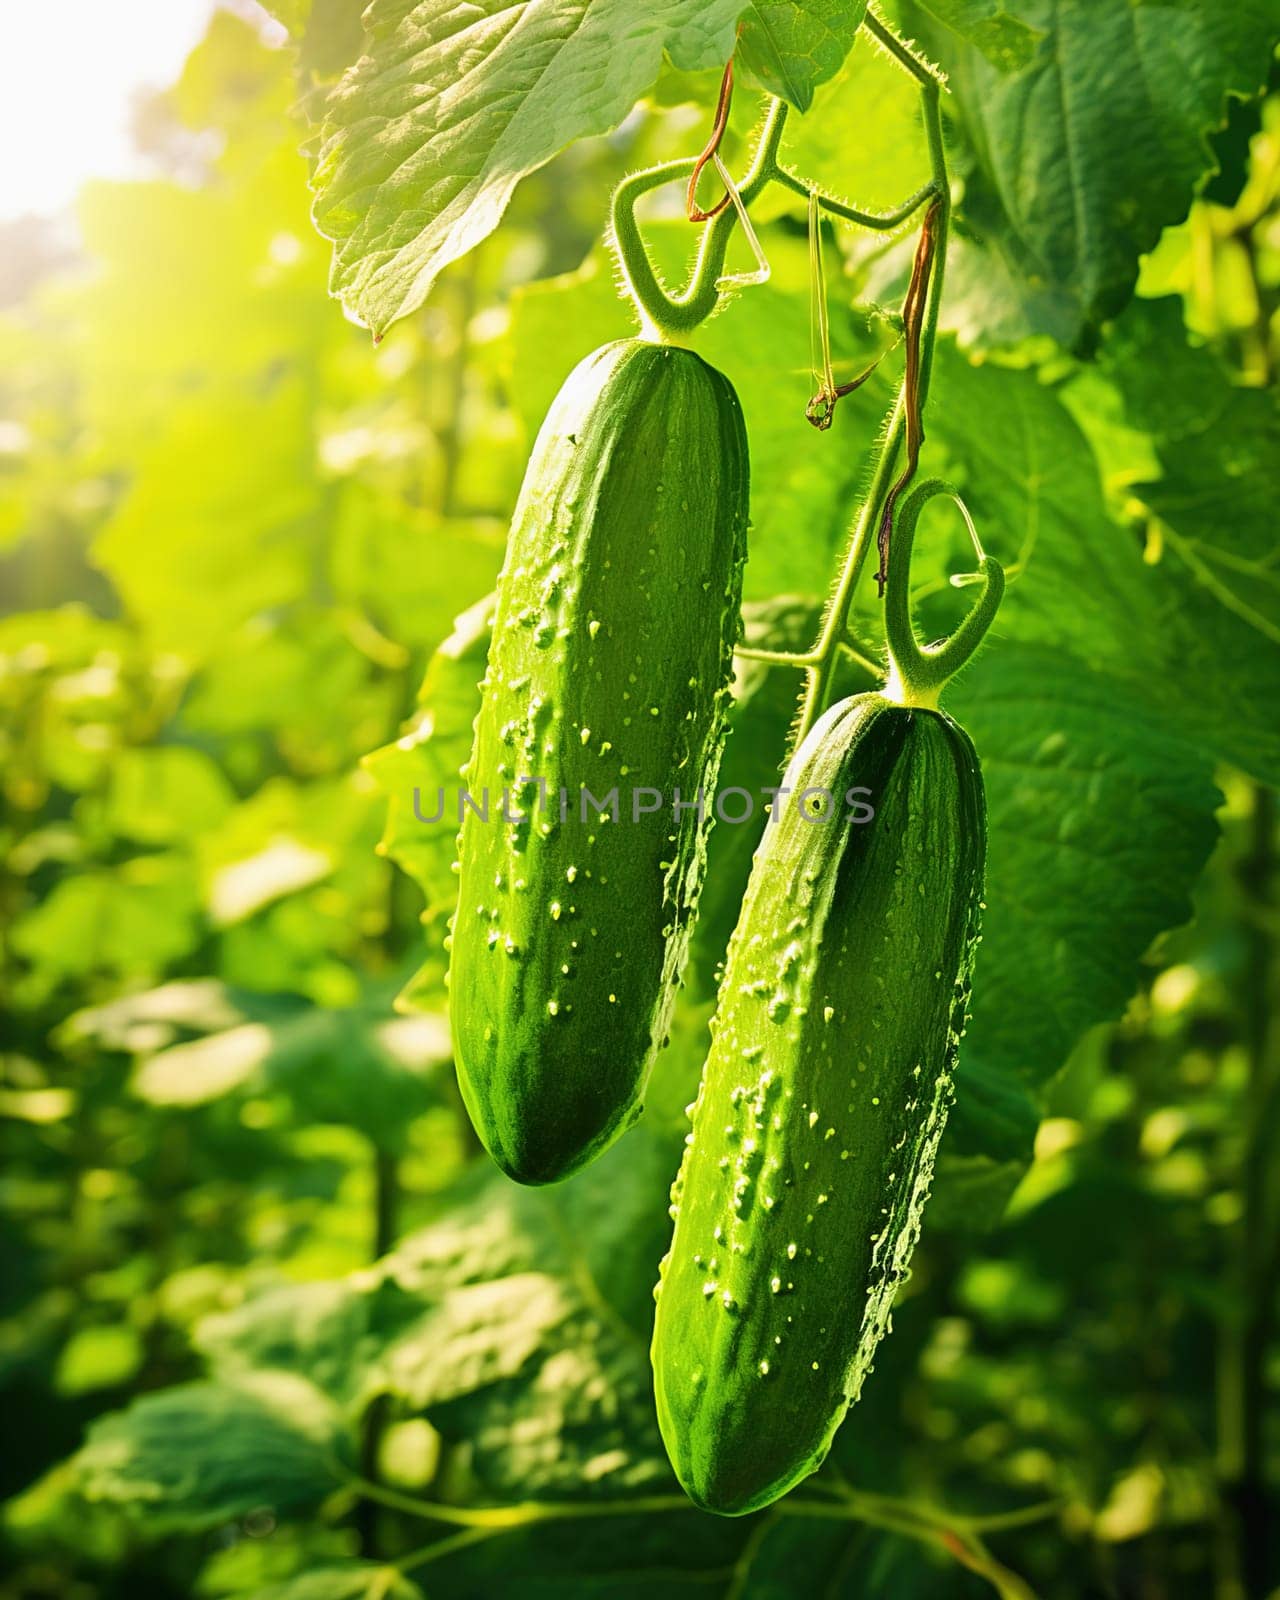 Cucumbers on a branch in a greenhouse close-up. by Yurich32